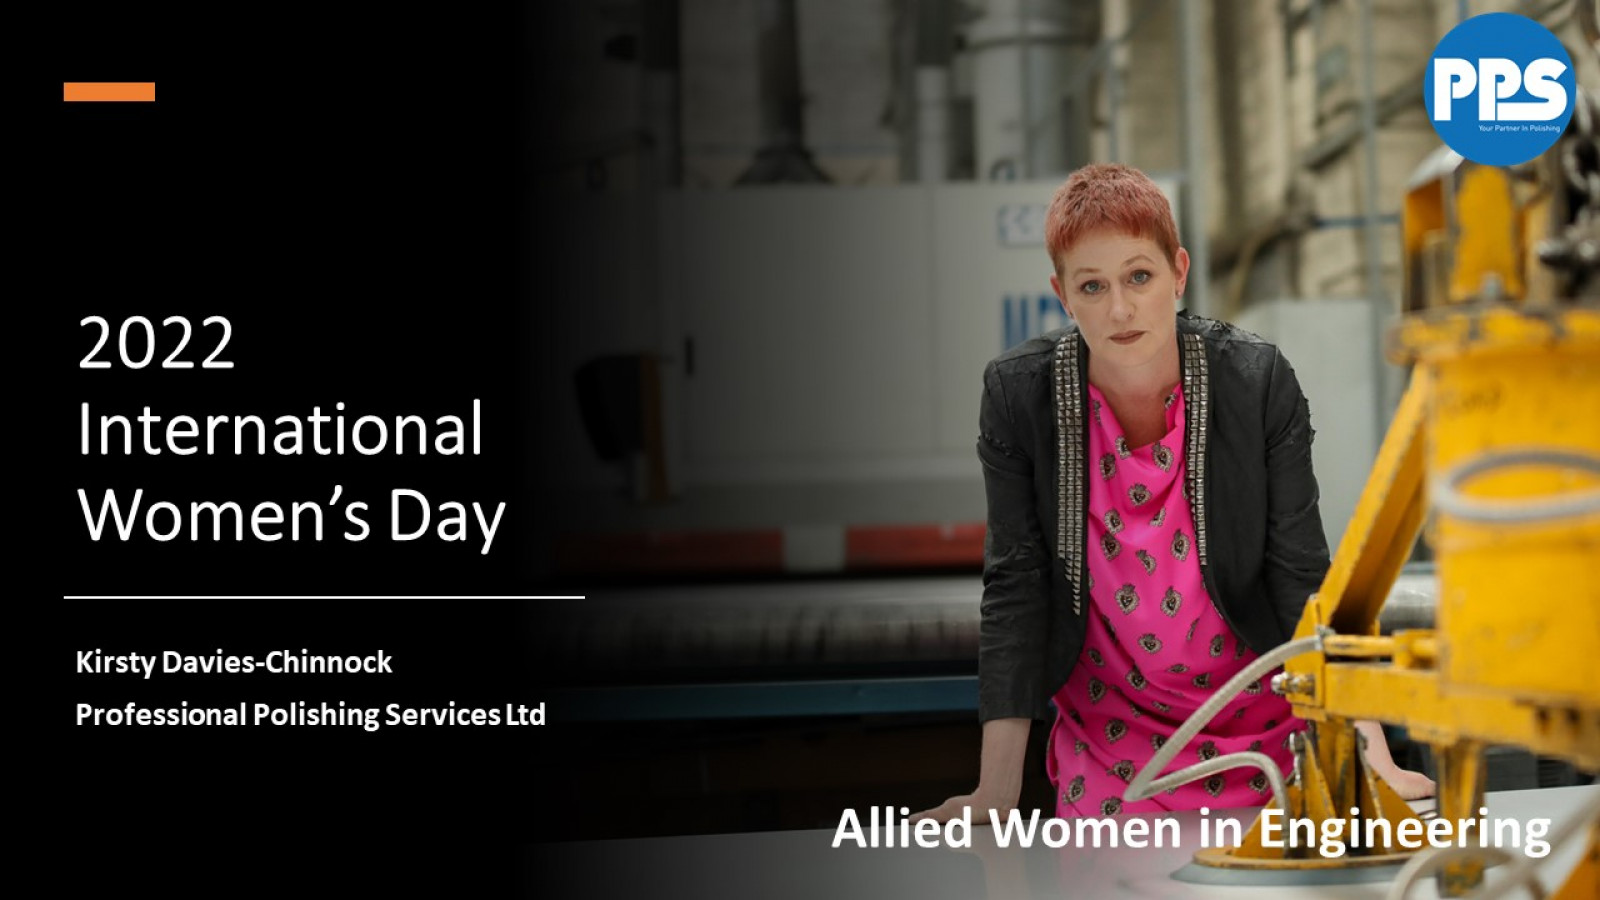 The Launch of Allied Women in Engineering